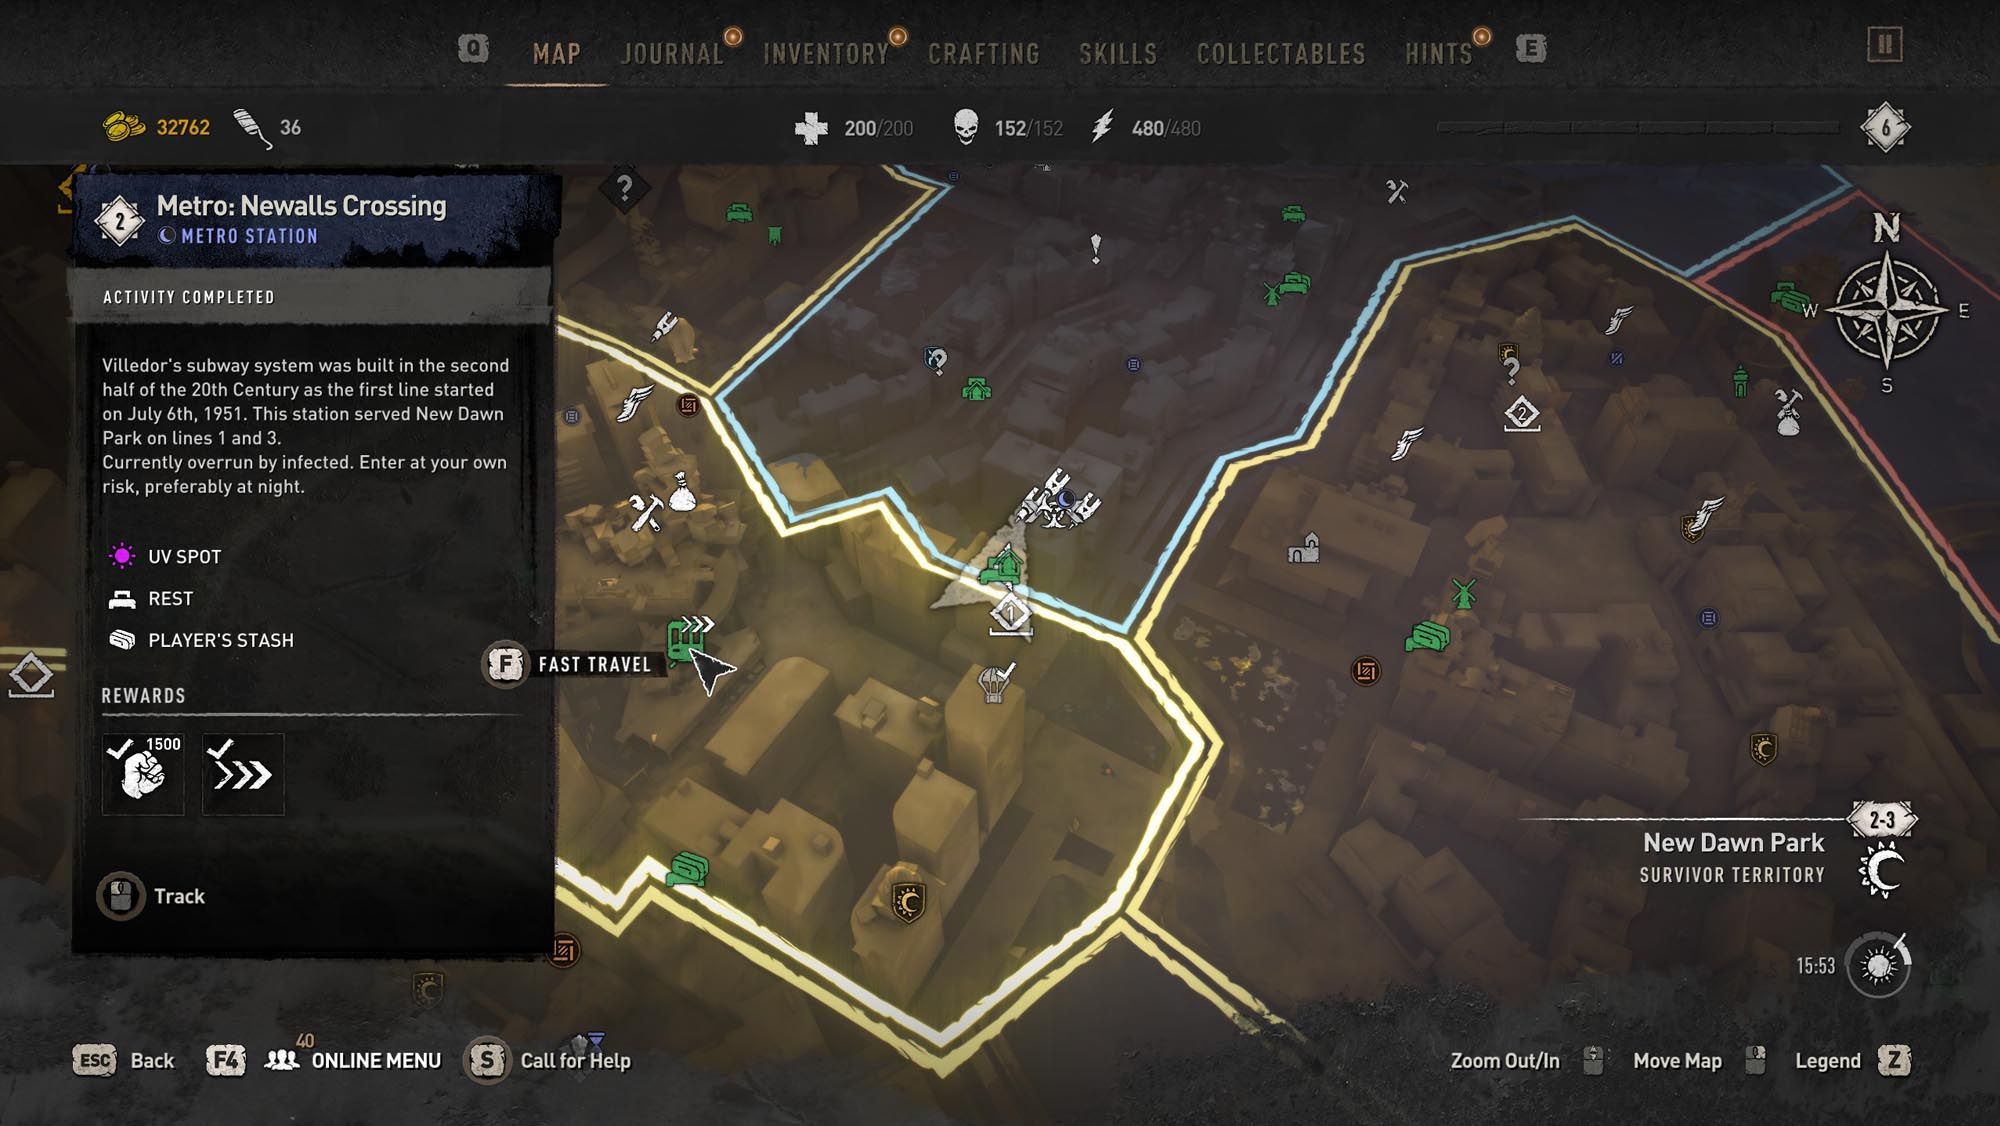 The main map of Dying Light 2 with a highlighted legend icon for fast travelling